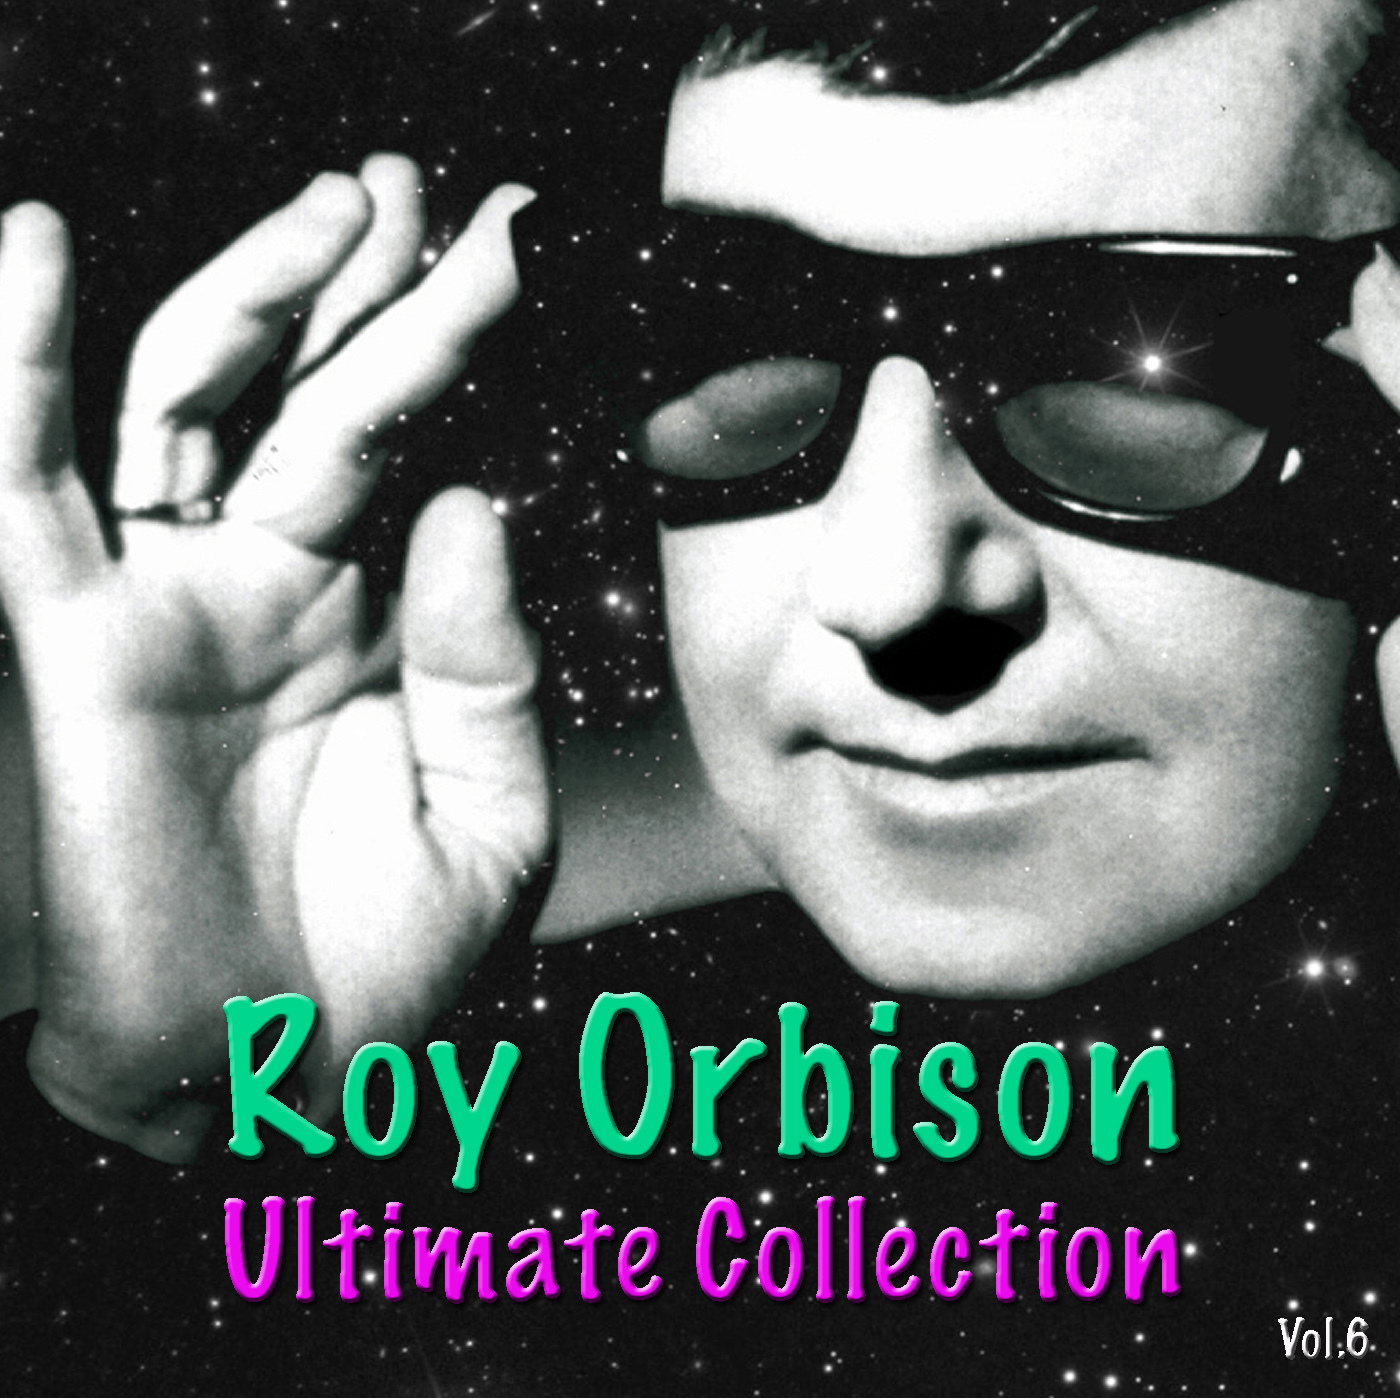 Roy Orbison, Ultimate Collection Vol. 6